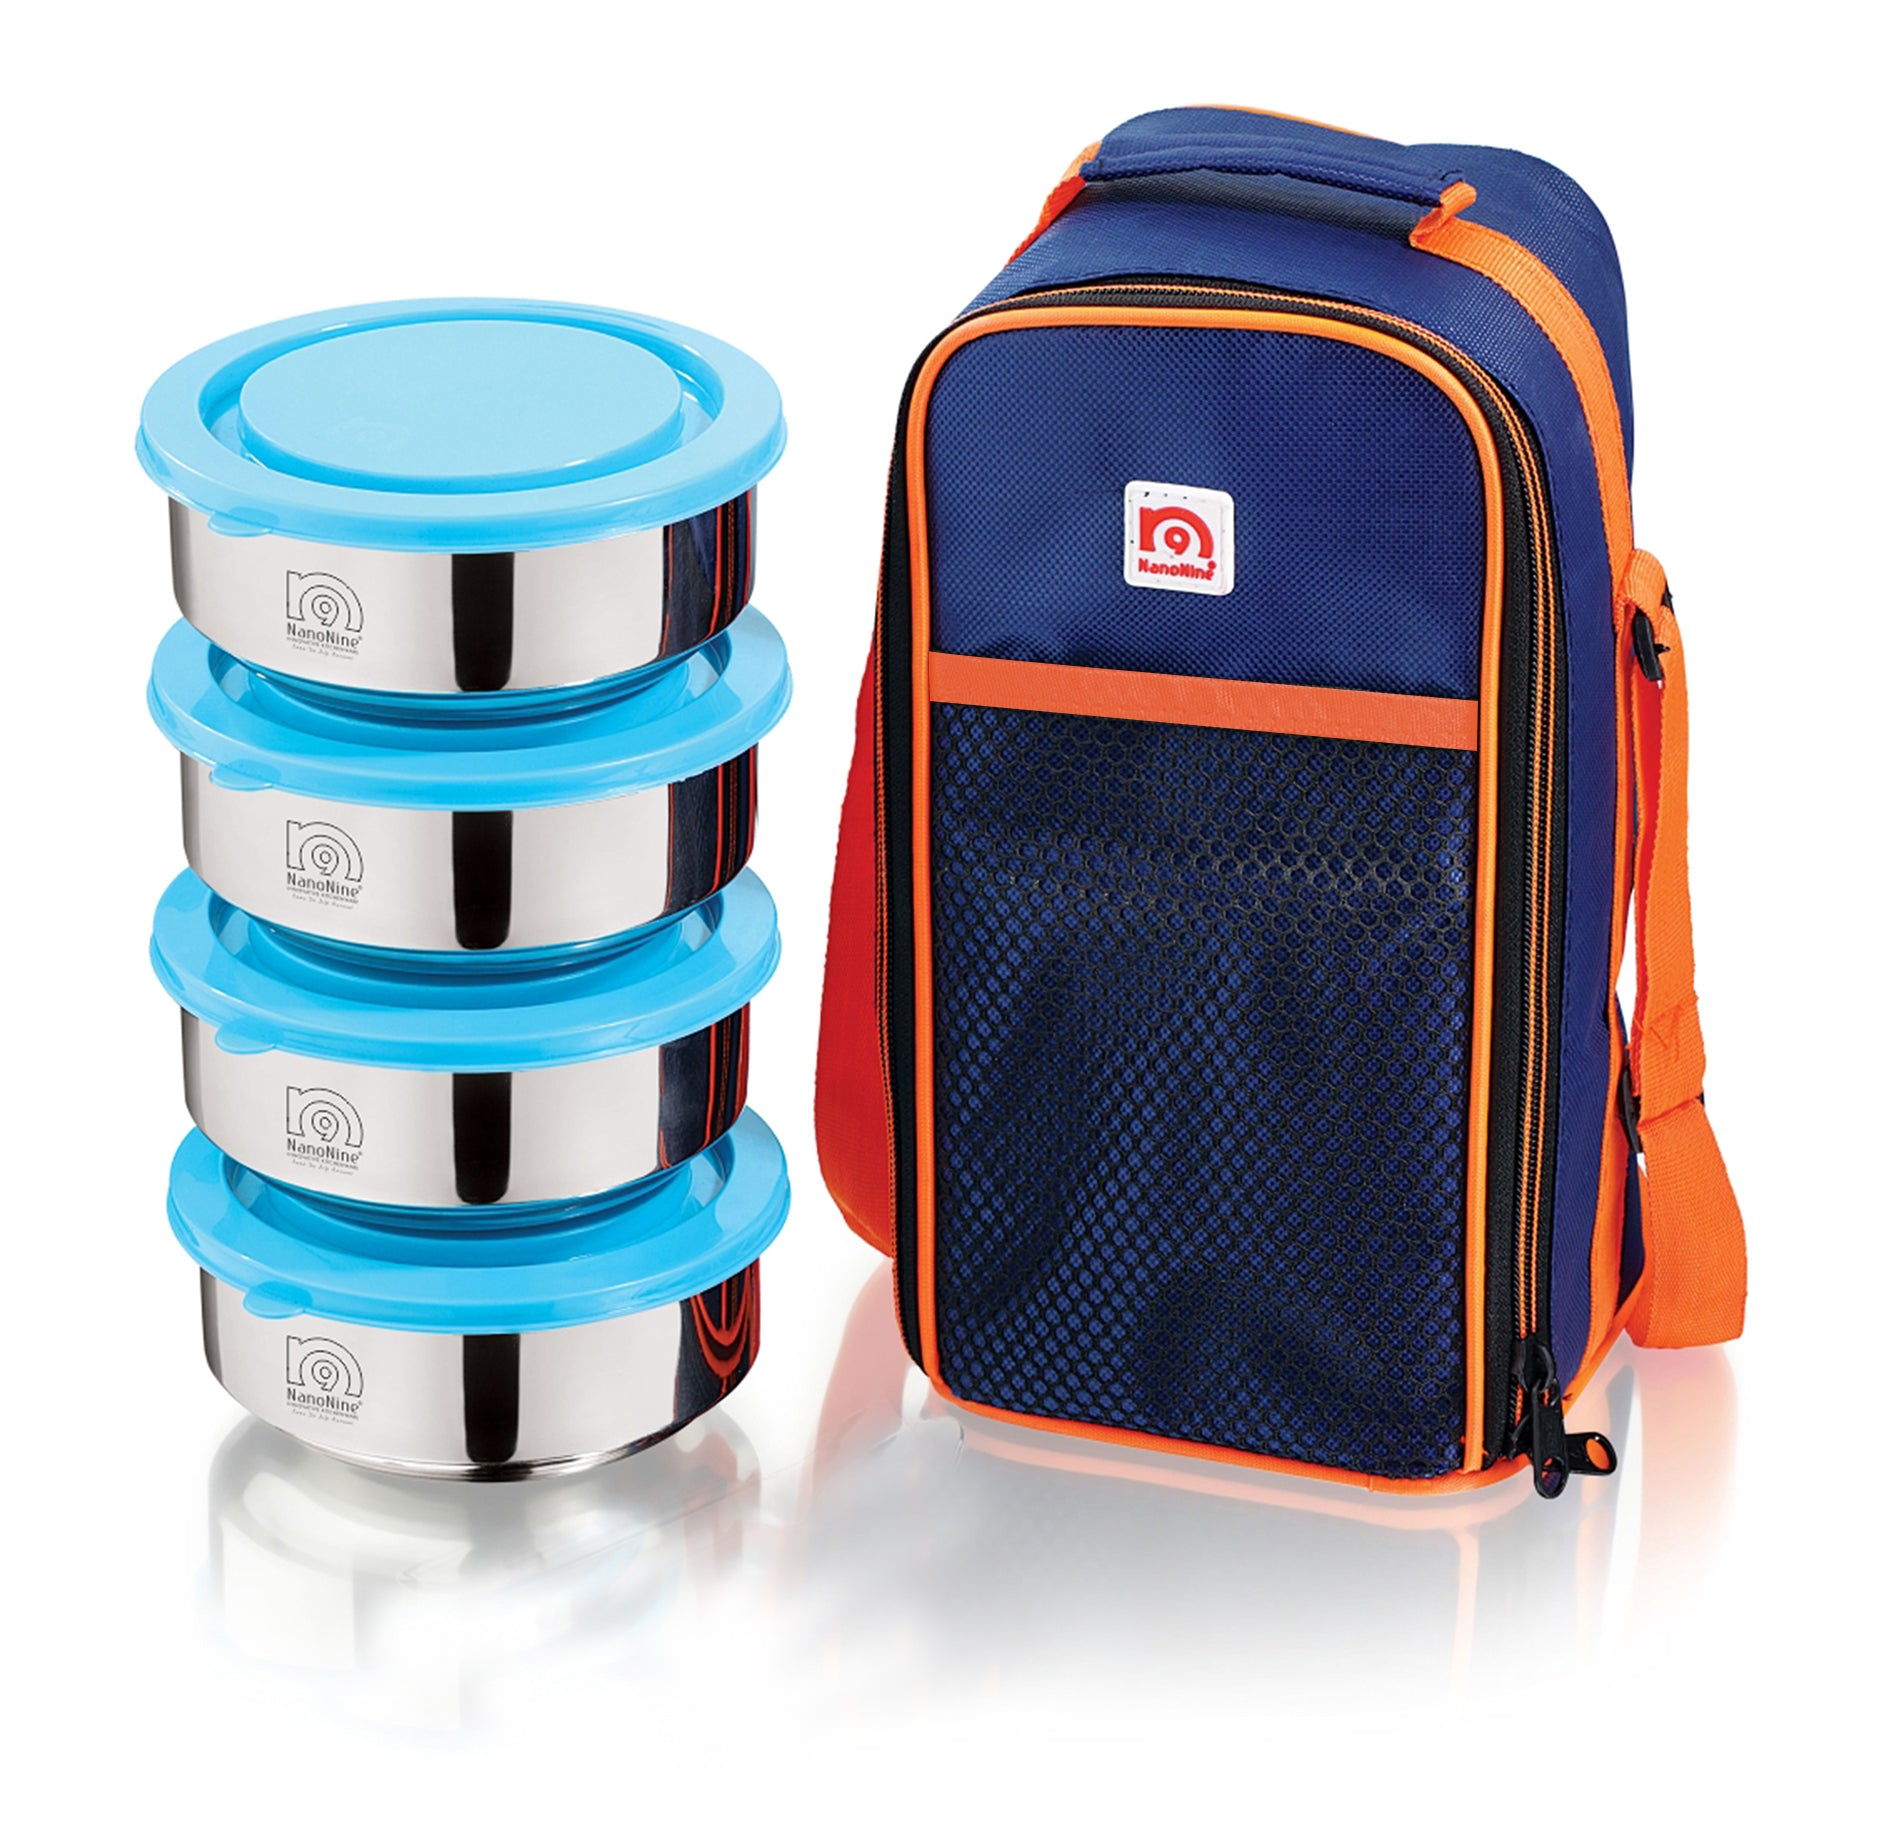 NanoNine Tiffiny 400 ml X 4 Double Wall Insulated Stainless Steel Lunch Box with Insulated Bag, Navy Blue